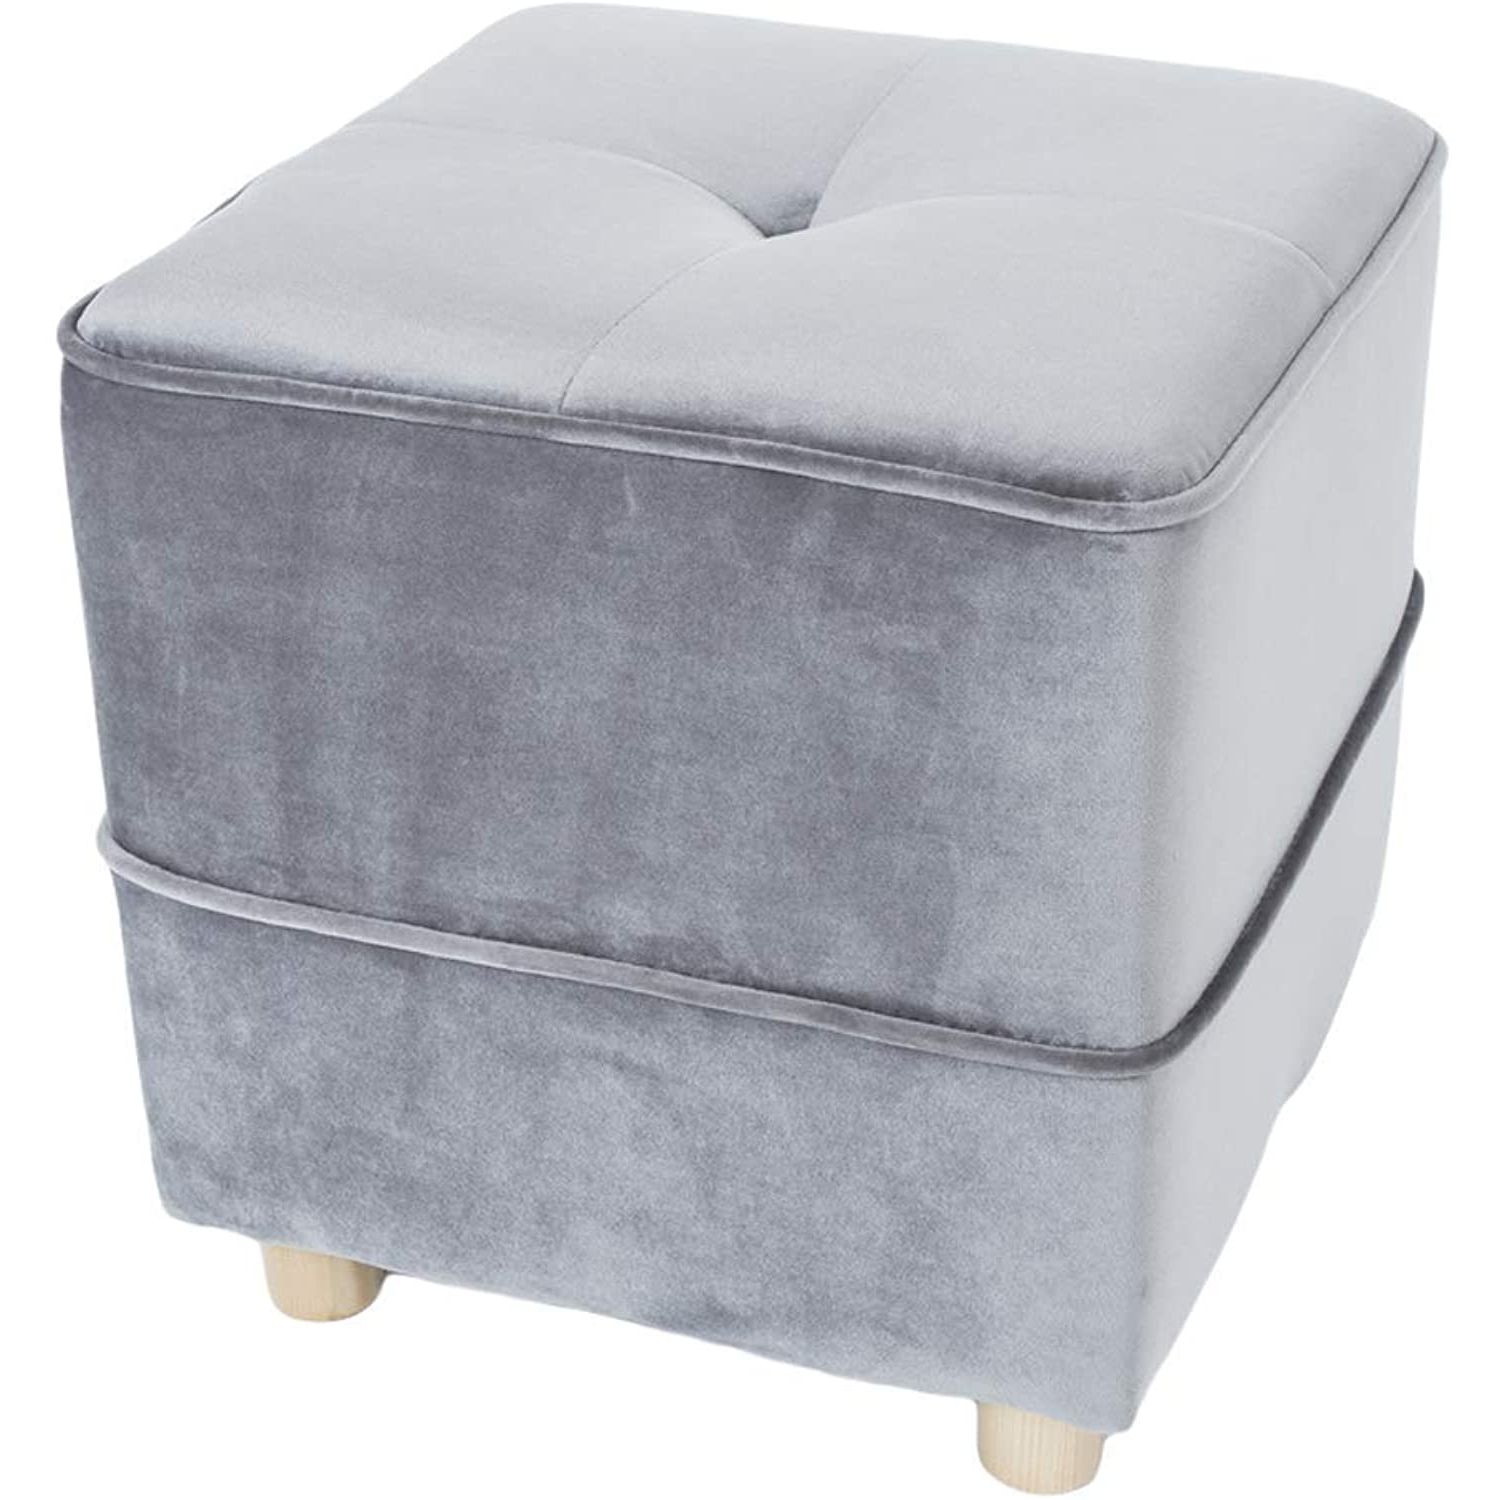 Fashionable Gray And Beige Solid Cube Pouf Ottomans In Nmdcdh Footstool Ottoman,square Cube Footrest Tufted Upholstered Velvet (View 7 of 10)